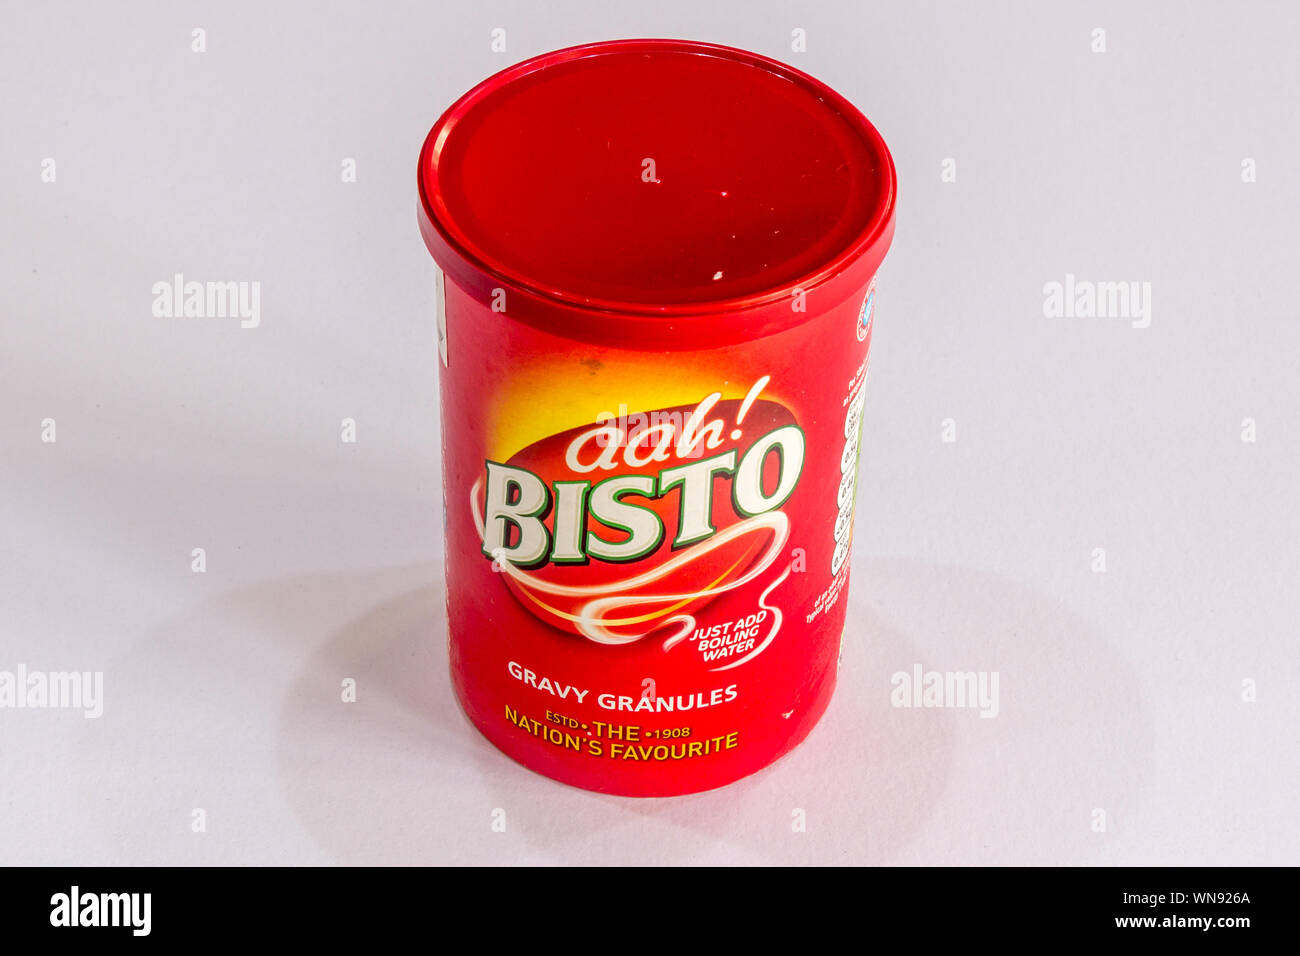 Phuket, Thailand - August 1st 2019: Canister of Bisto gravy granules. The product has been sold since 1908 Stock Photo